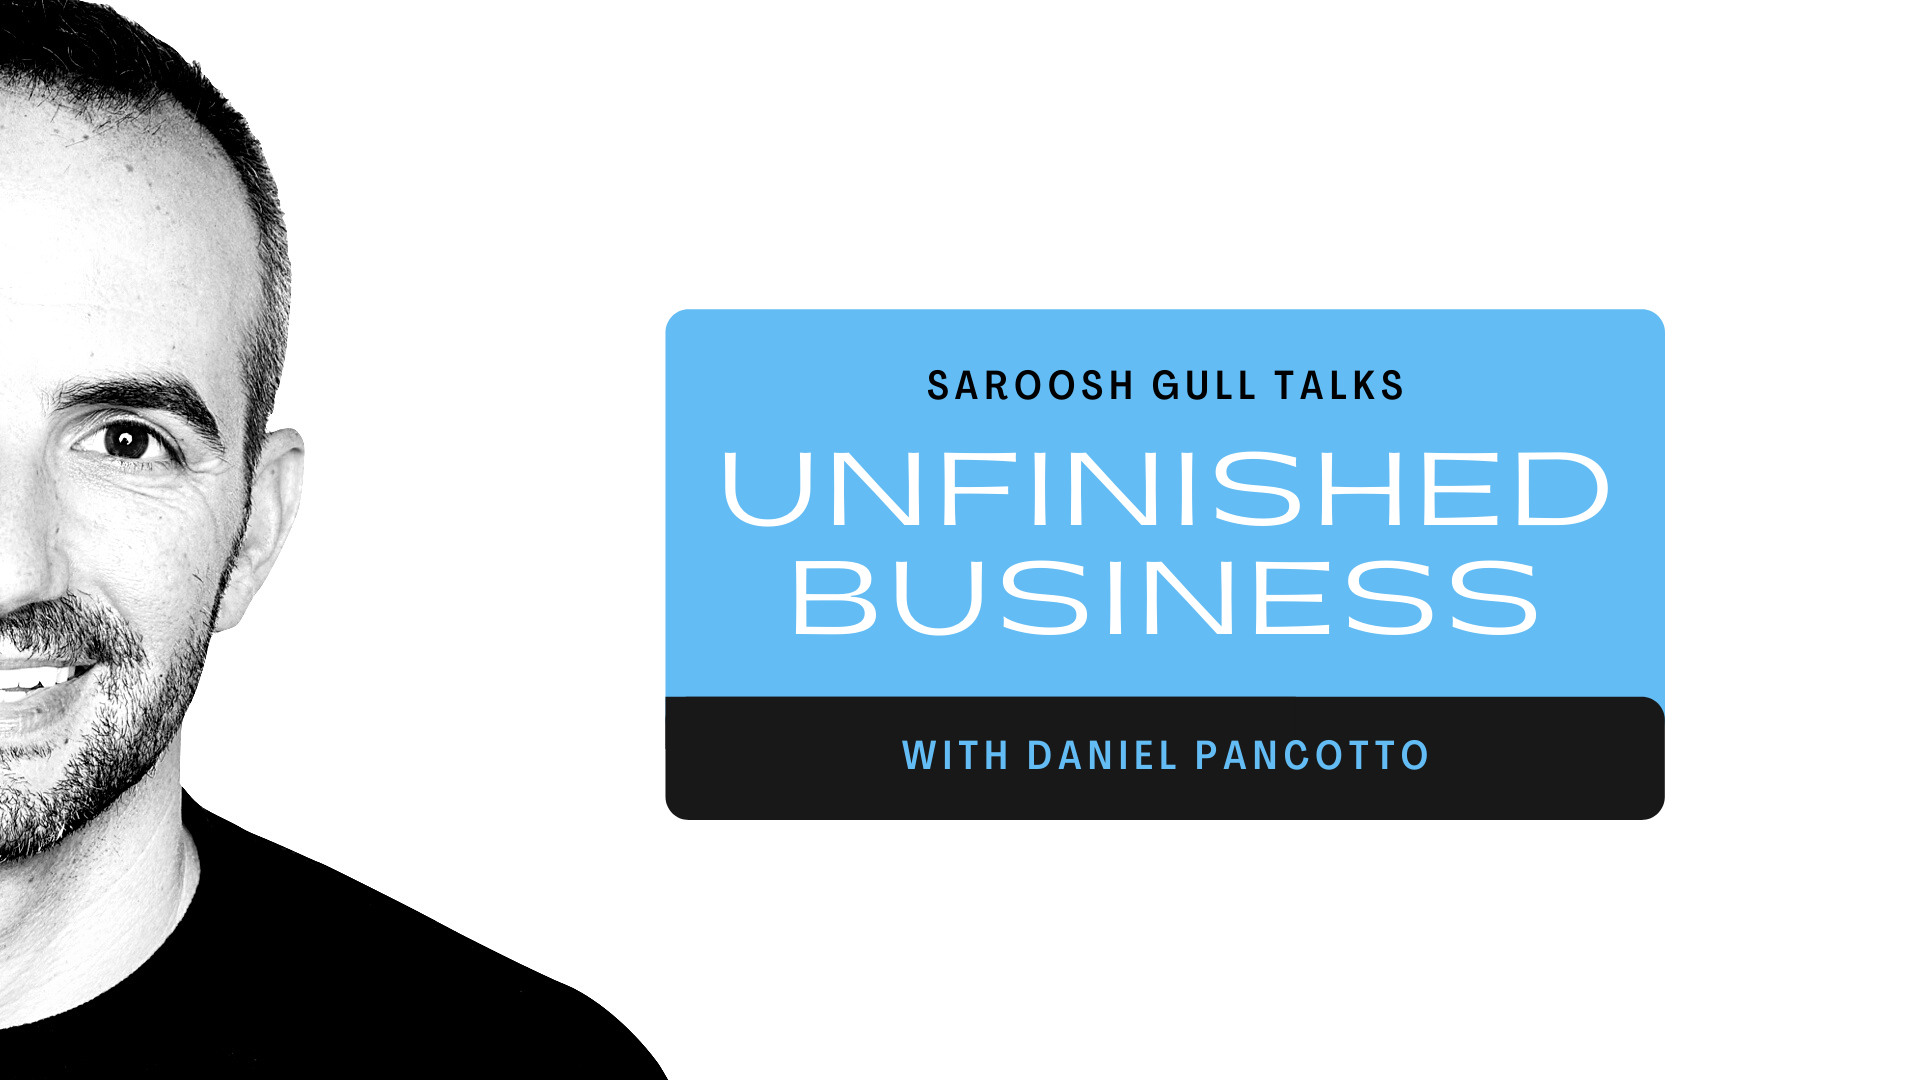 UNFINISHED BUSINESS - with Daniel Pancotto